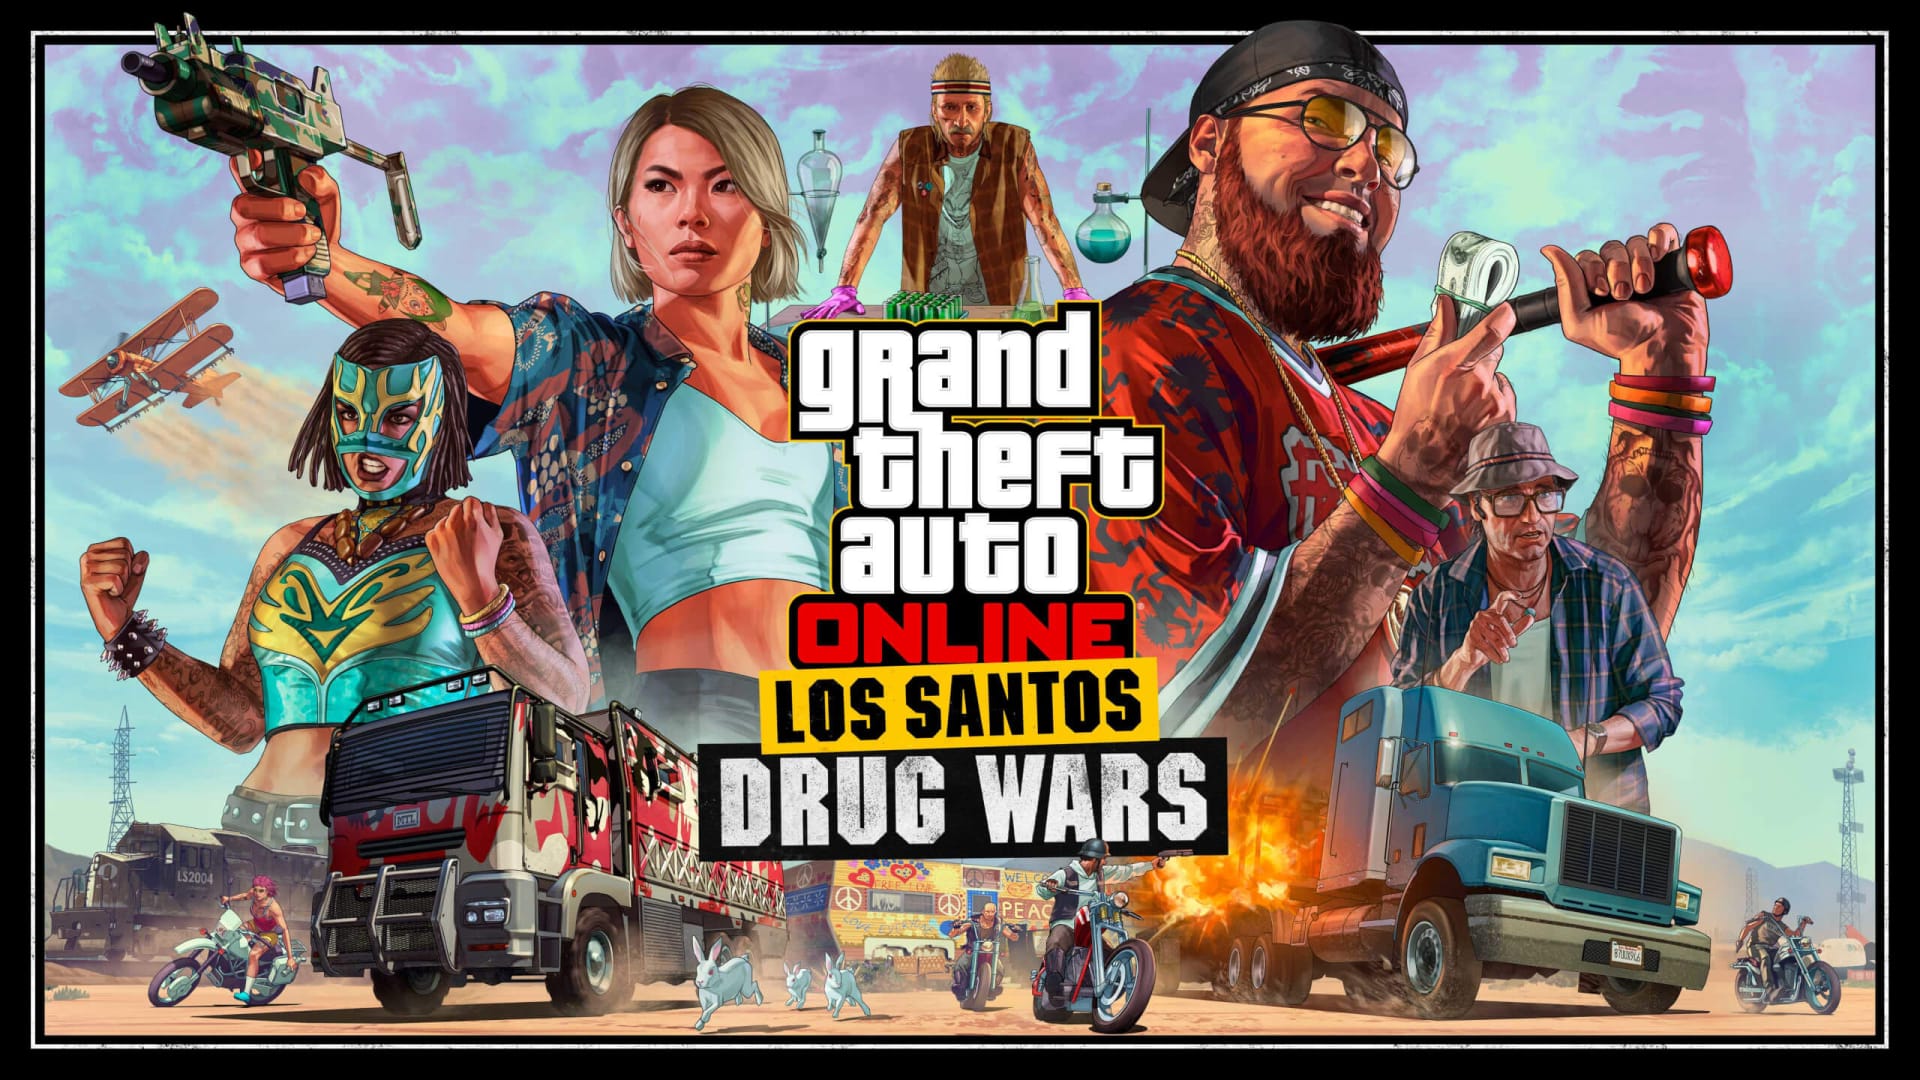 GTA Online Gives Drugs, Wars, and Fraud for the Holidays